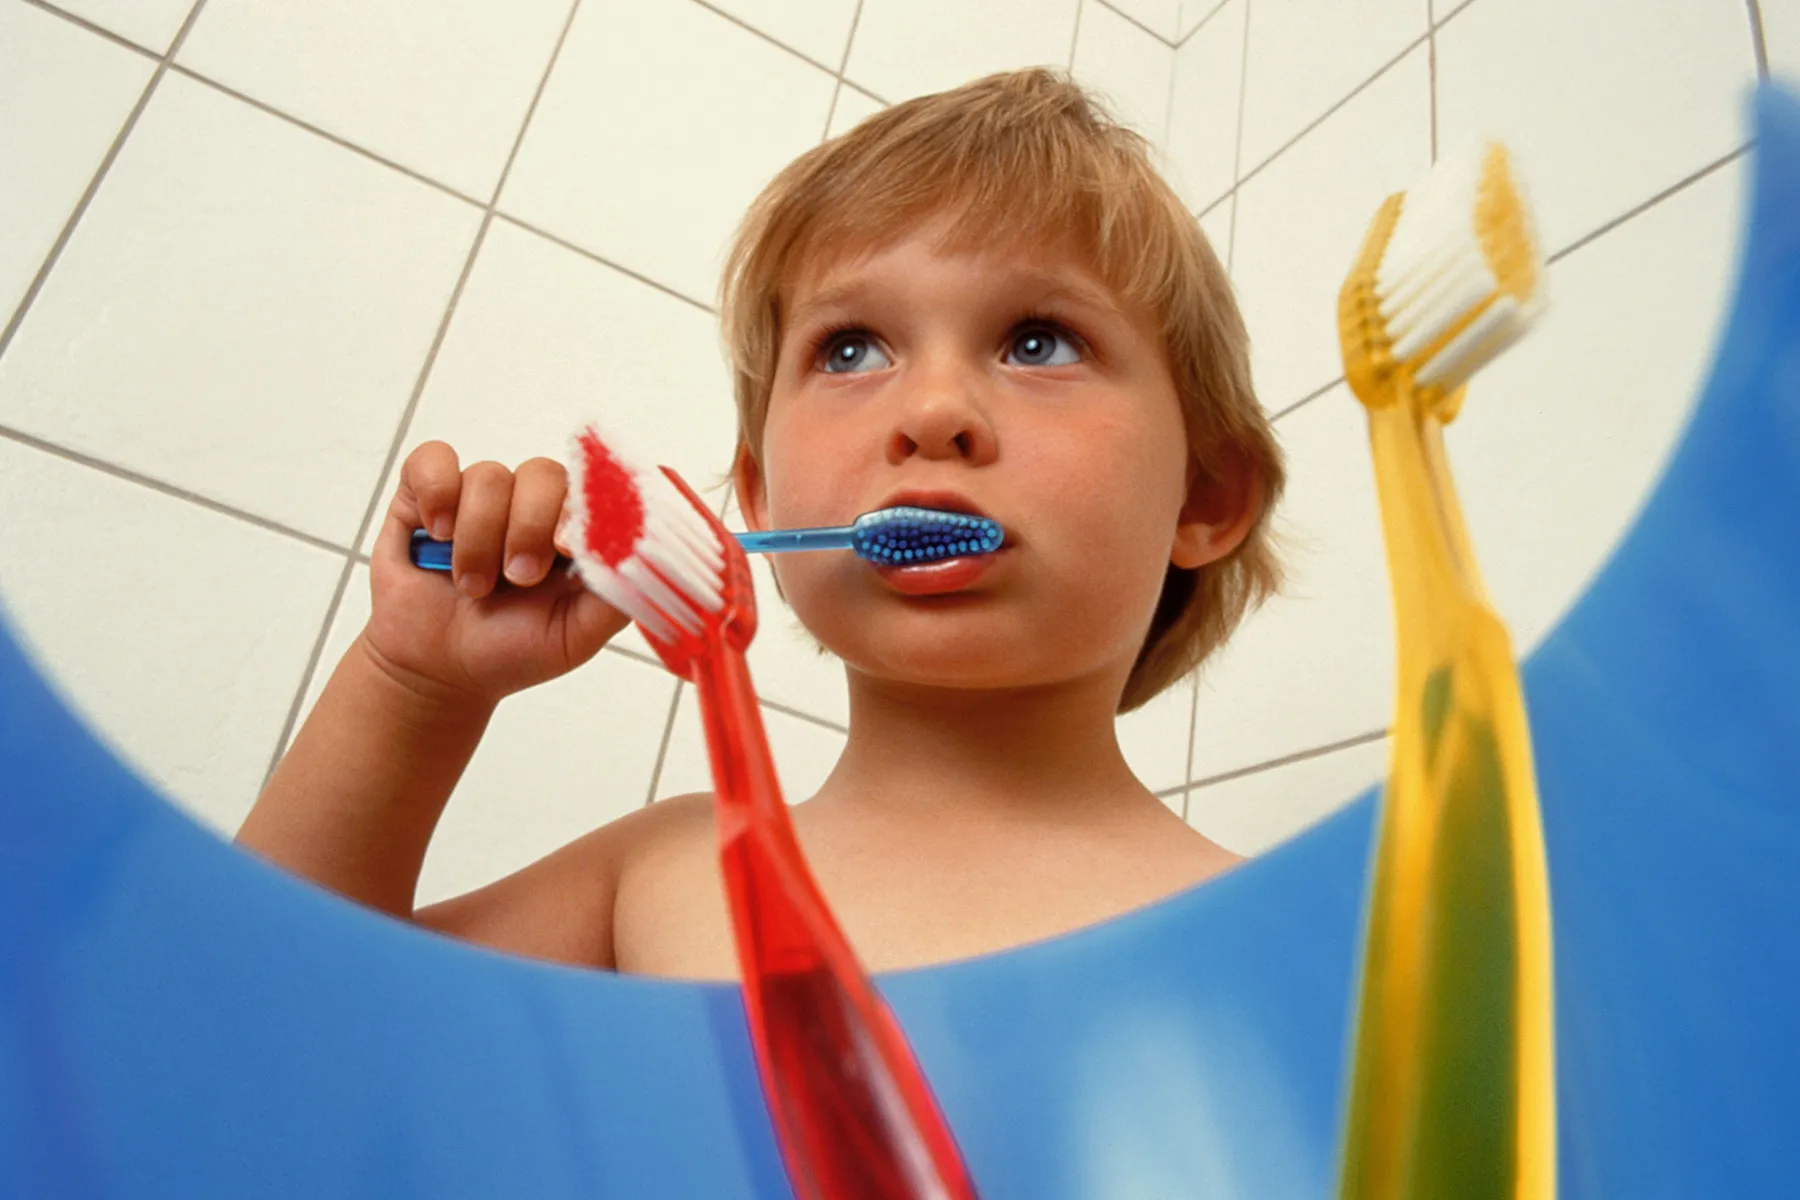 The 'Oreo Test' and Other Ways to Help Kids' Oral Health thumbnail